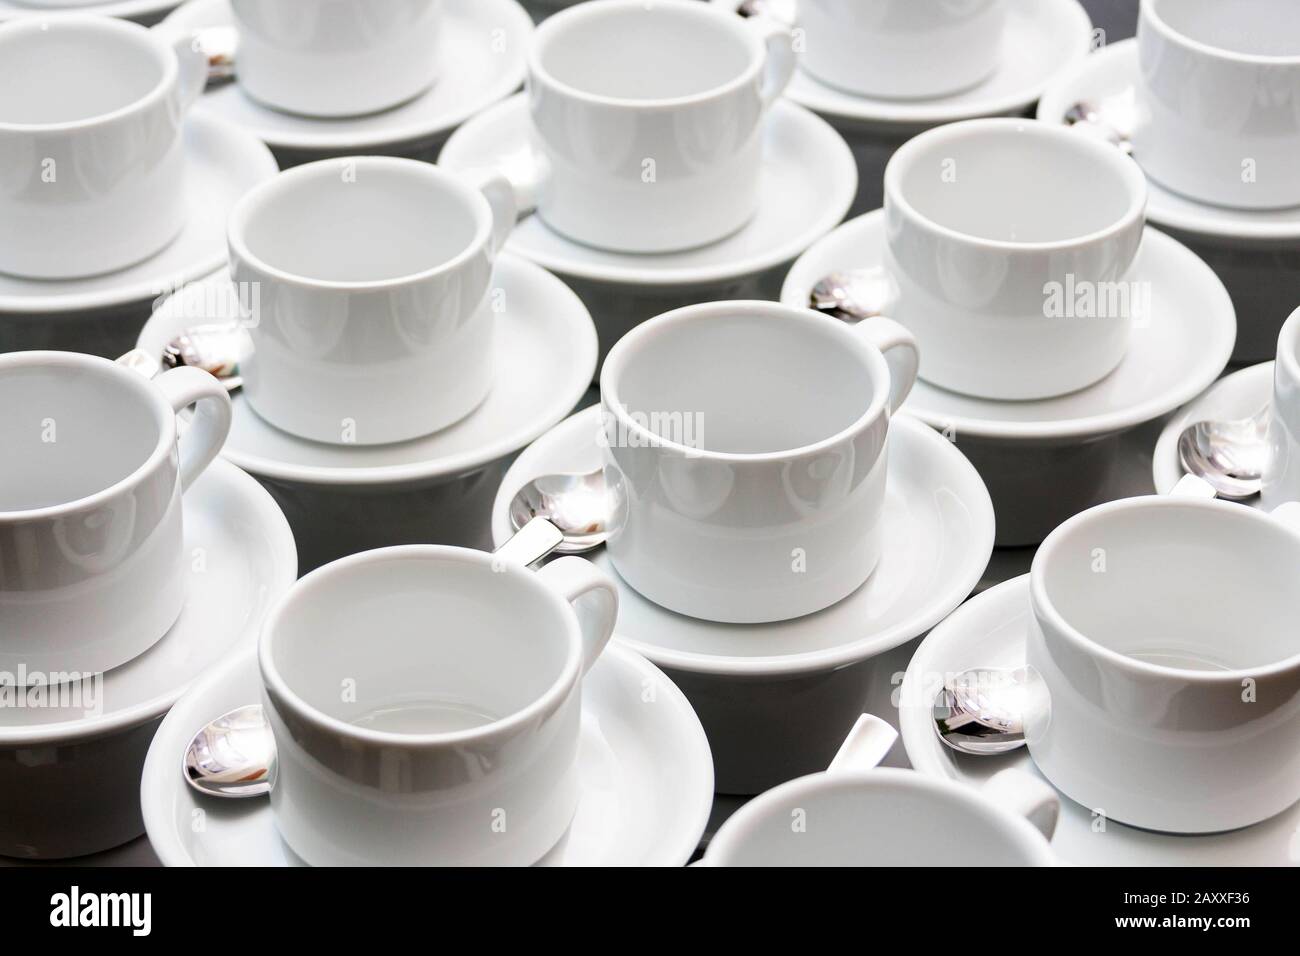 Many empty white tea cups abstract food industry background texture, repetitive pattern Cups stacked with spoons wallpaper White dishes, catering Stock Photo